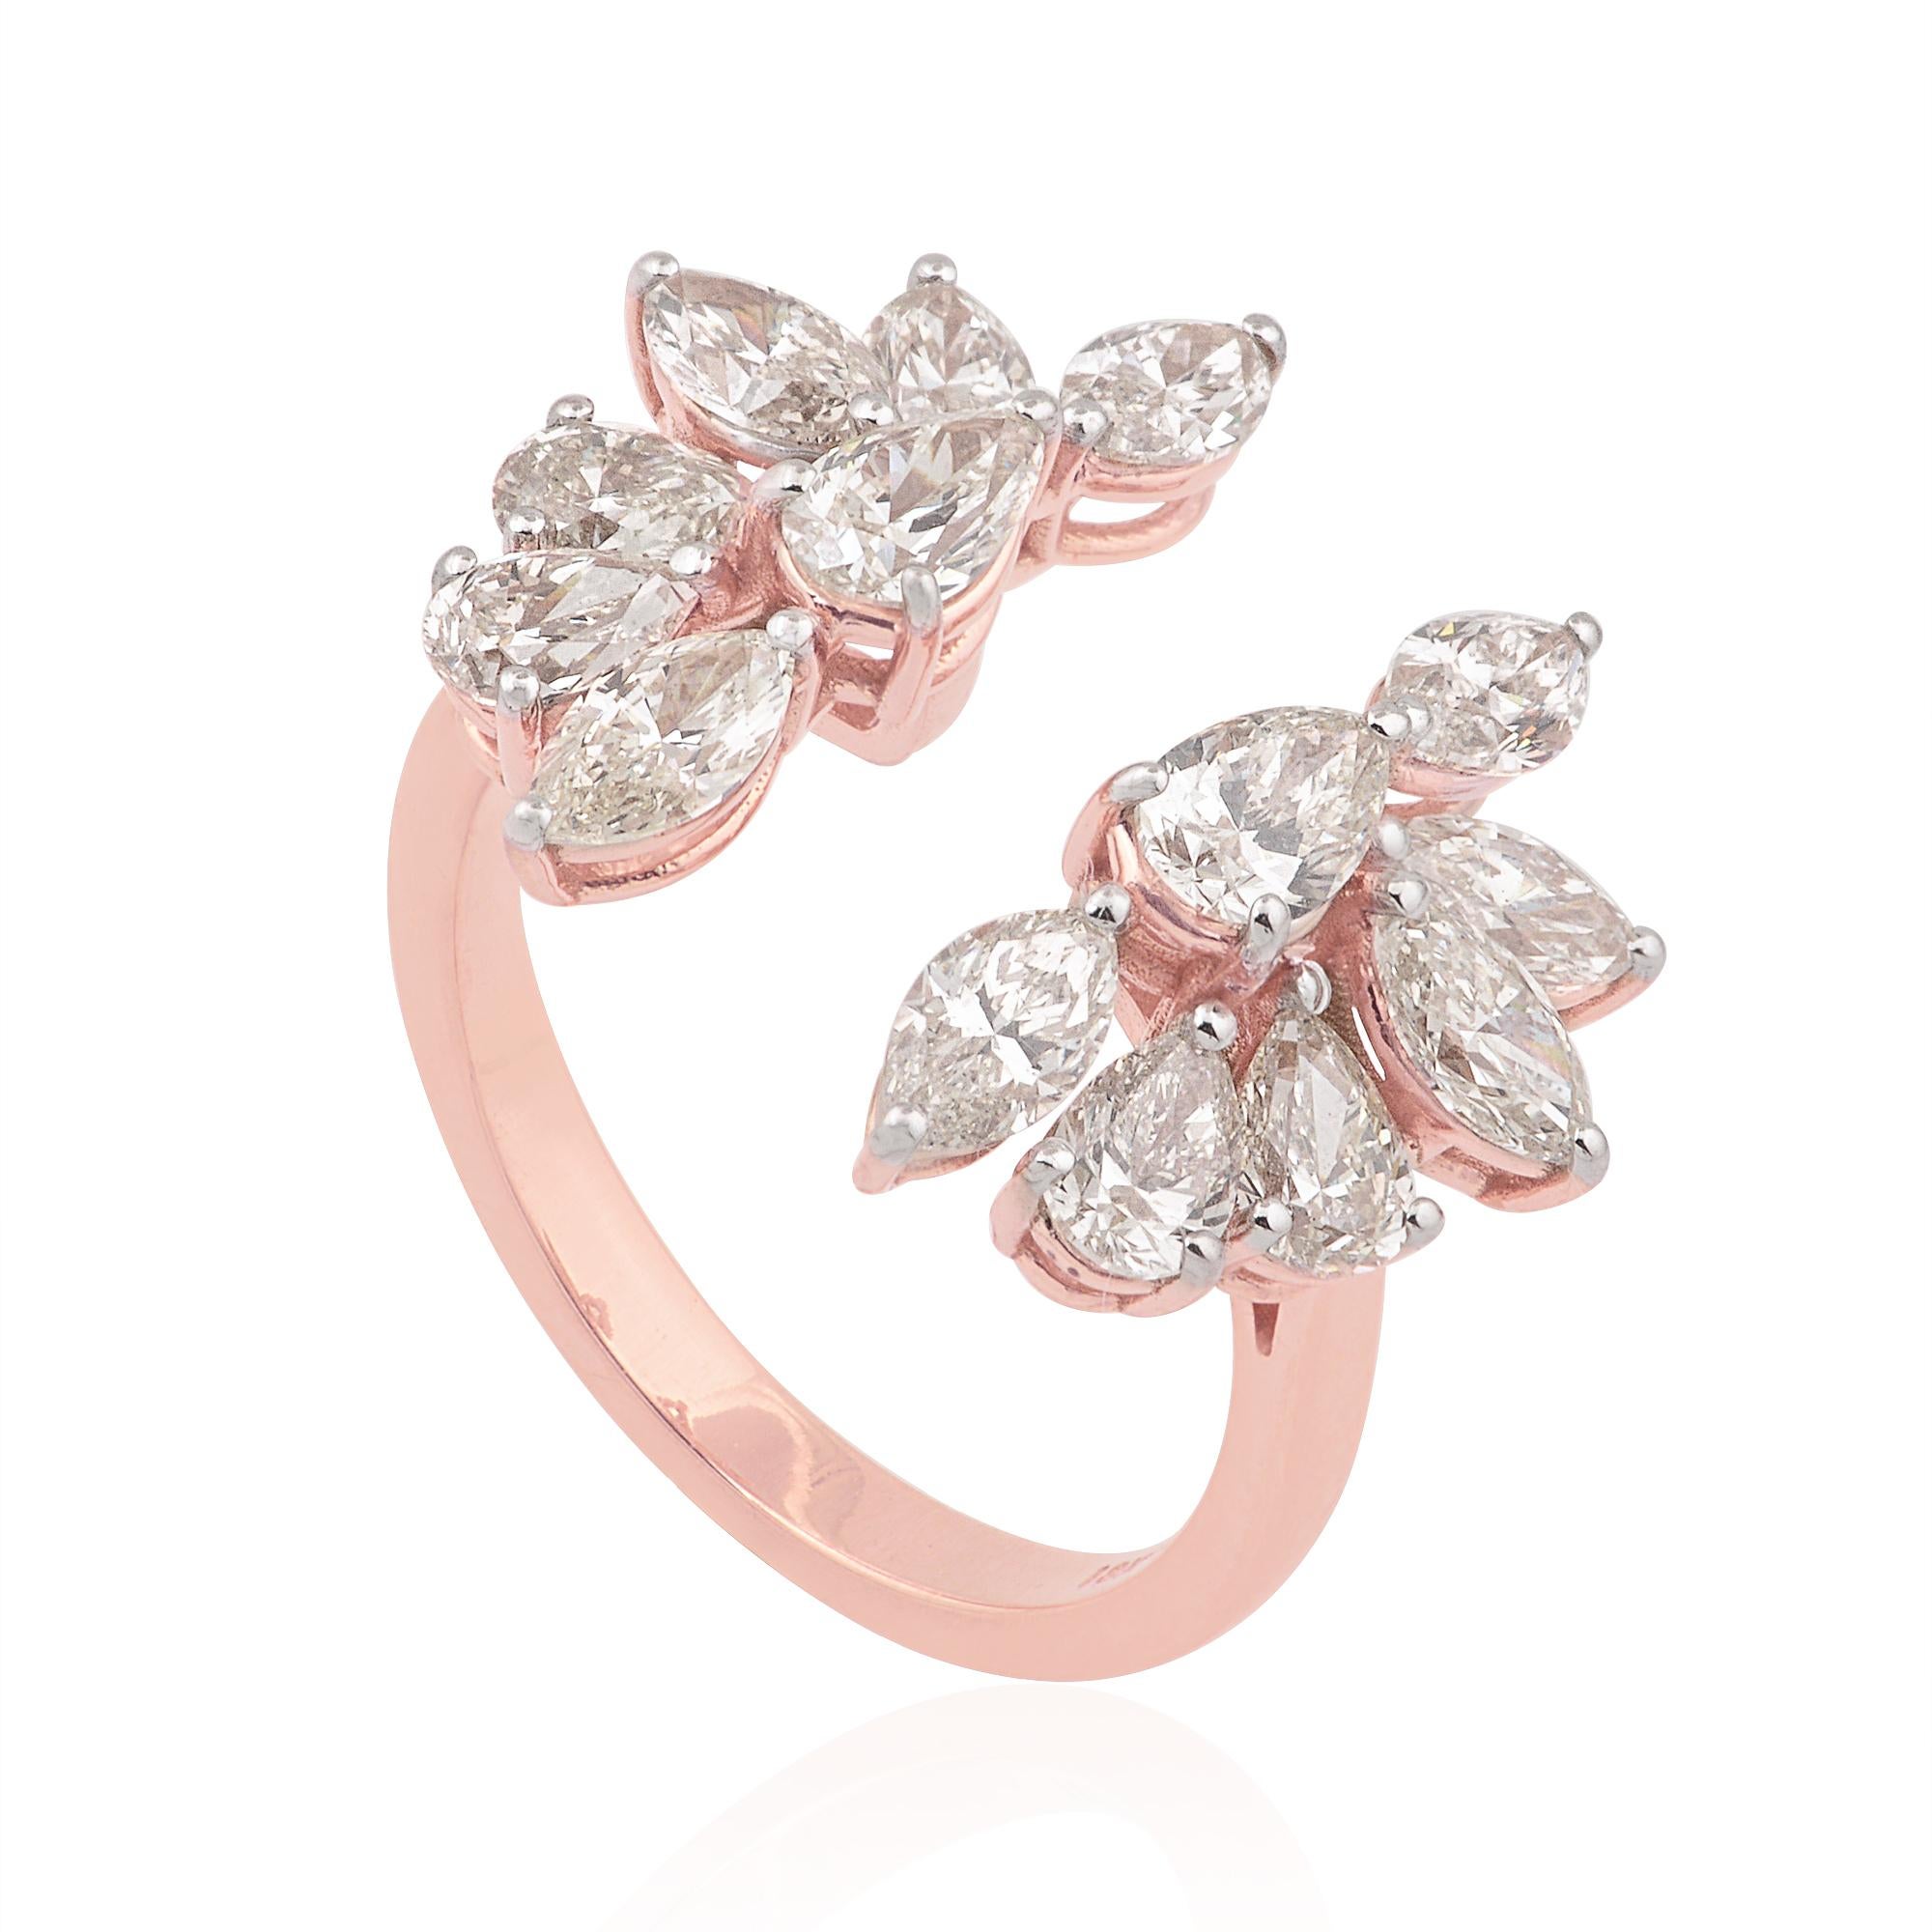 This Natural Marquise & Pear Diamond Ring is more than just a piece of jewelry; it is a timeless expression of love, commitment, and sophistication. Whether worn as a symbol of everlasting devotion or as a statement of personal style, it exudes an